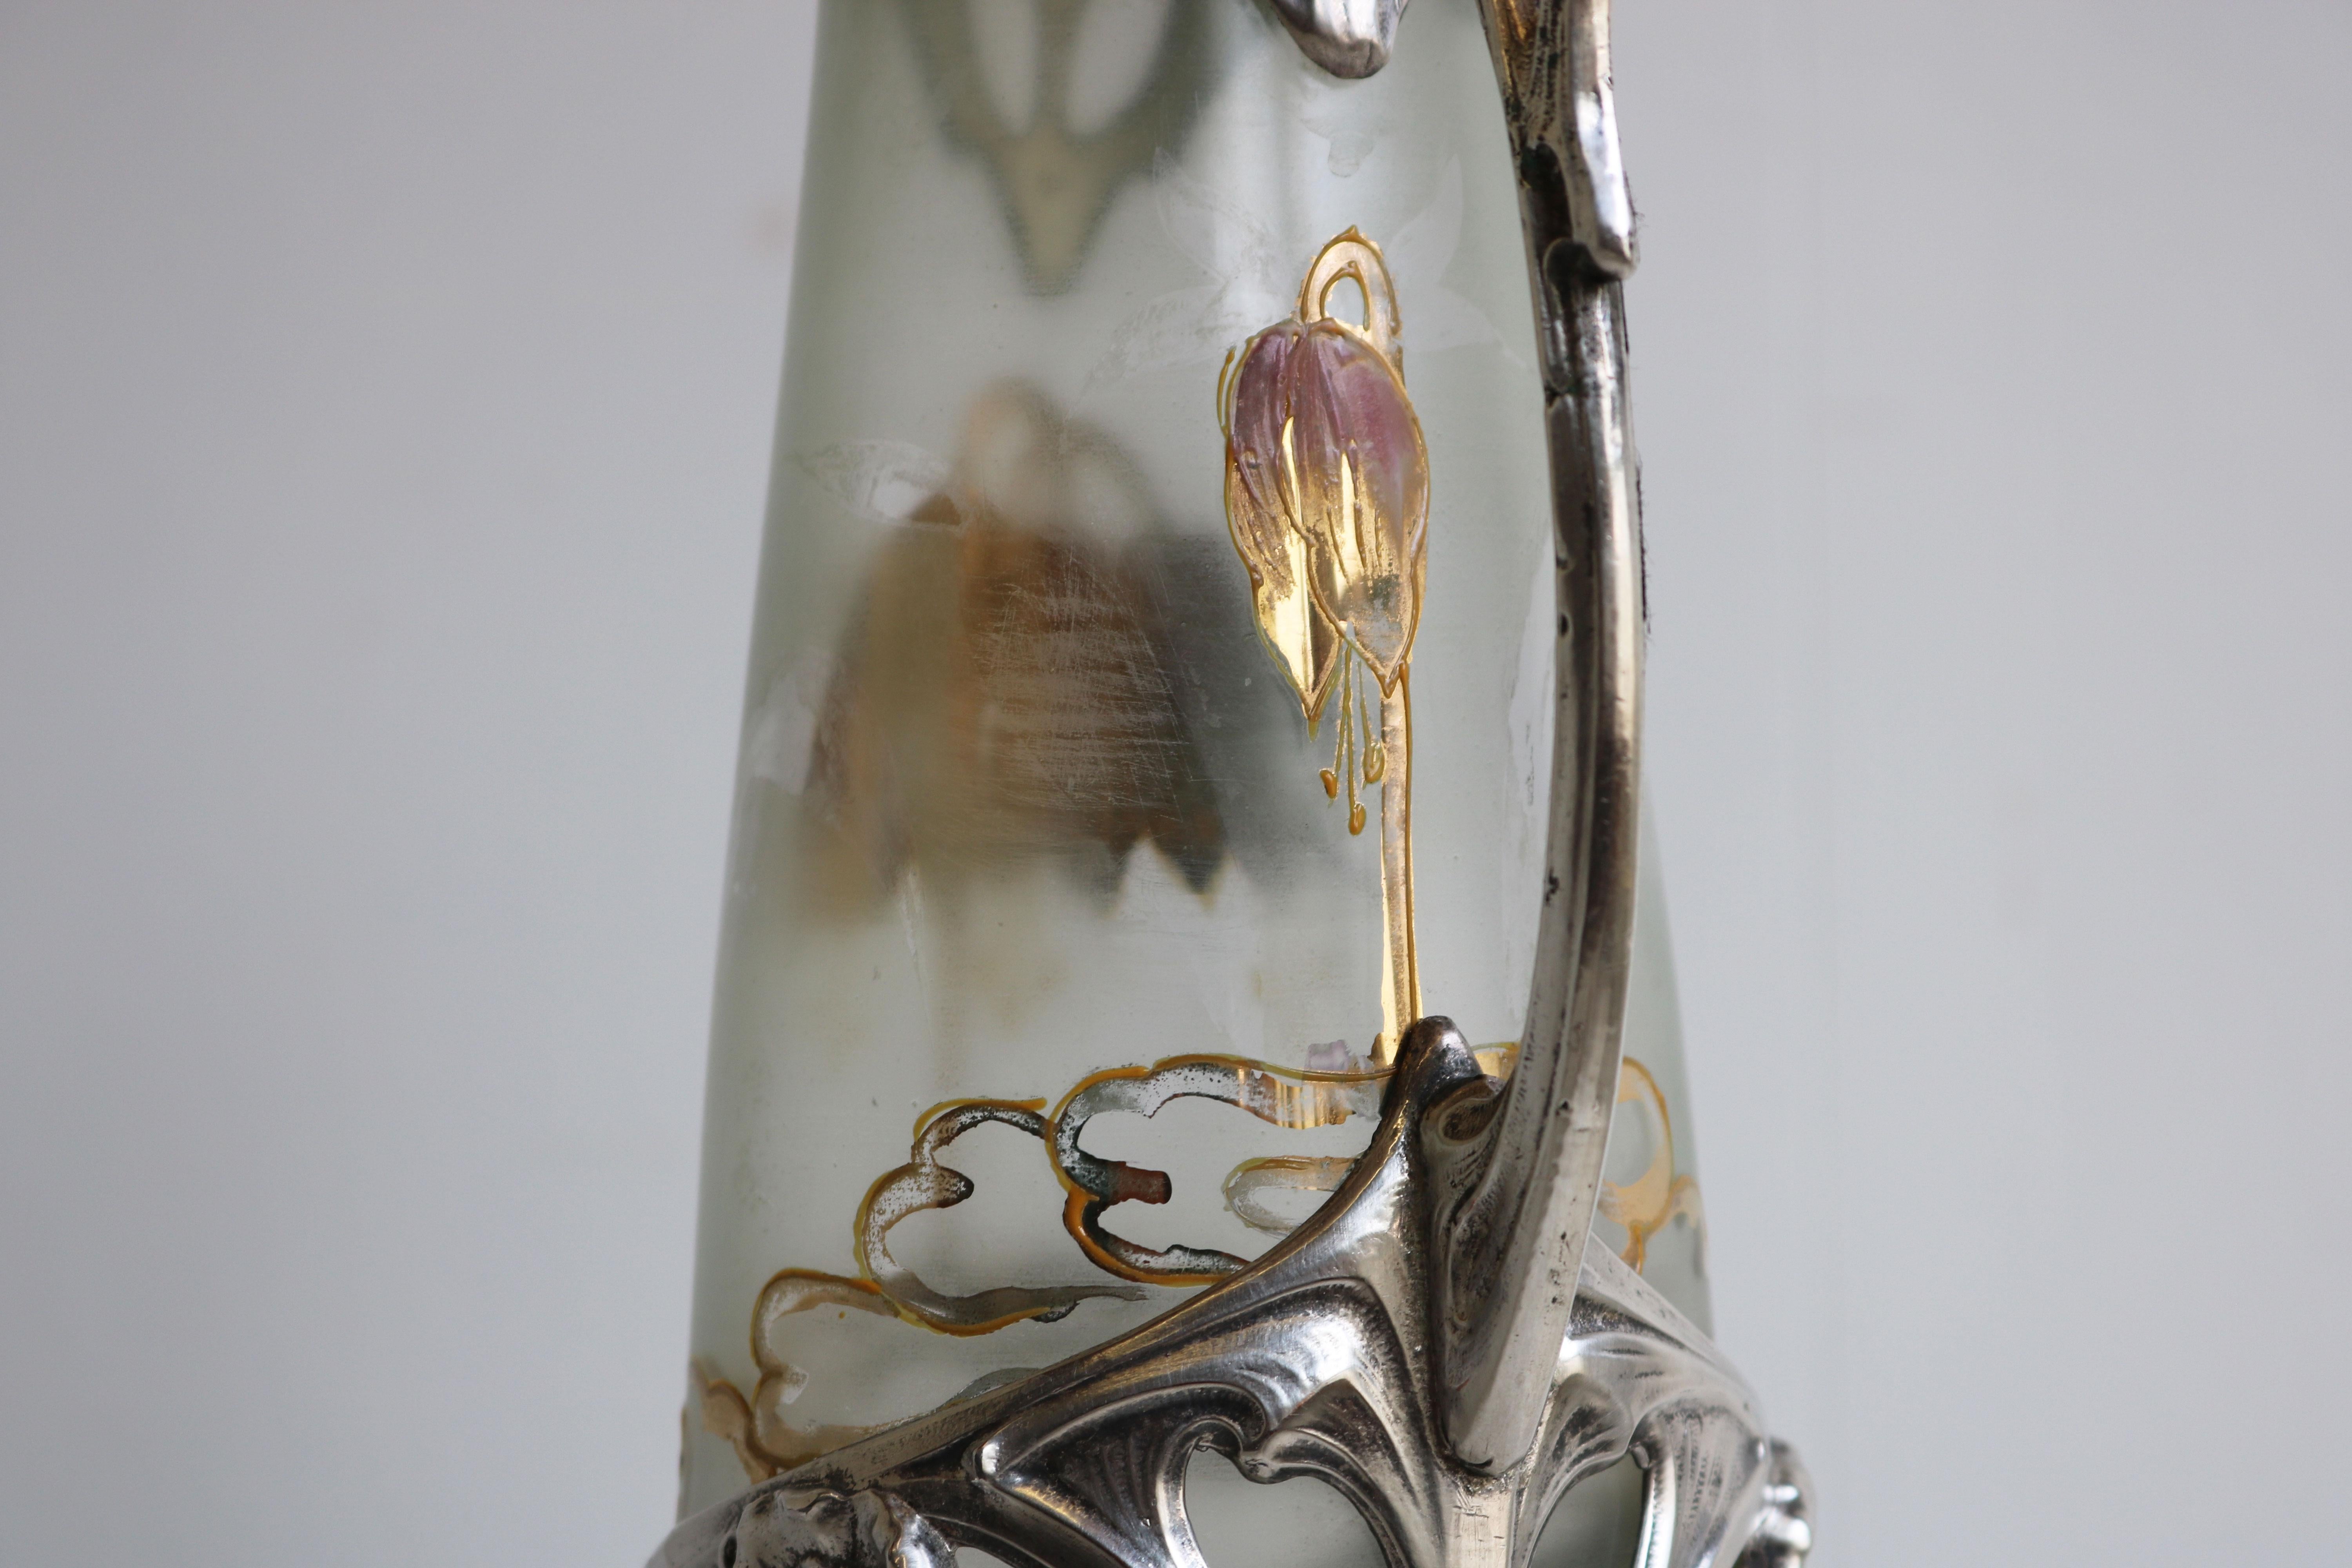 Exquisite French Art Nouveau Decanter / Pitcher by J. Barian Silver Glass 1900 For Sale 1